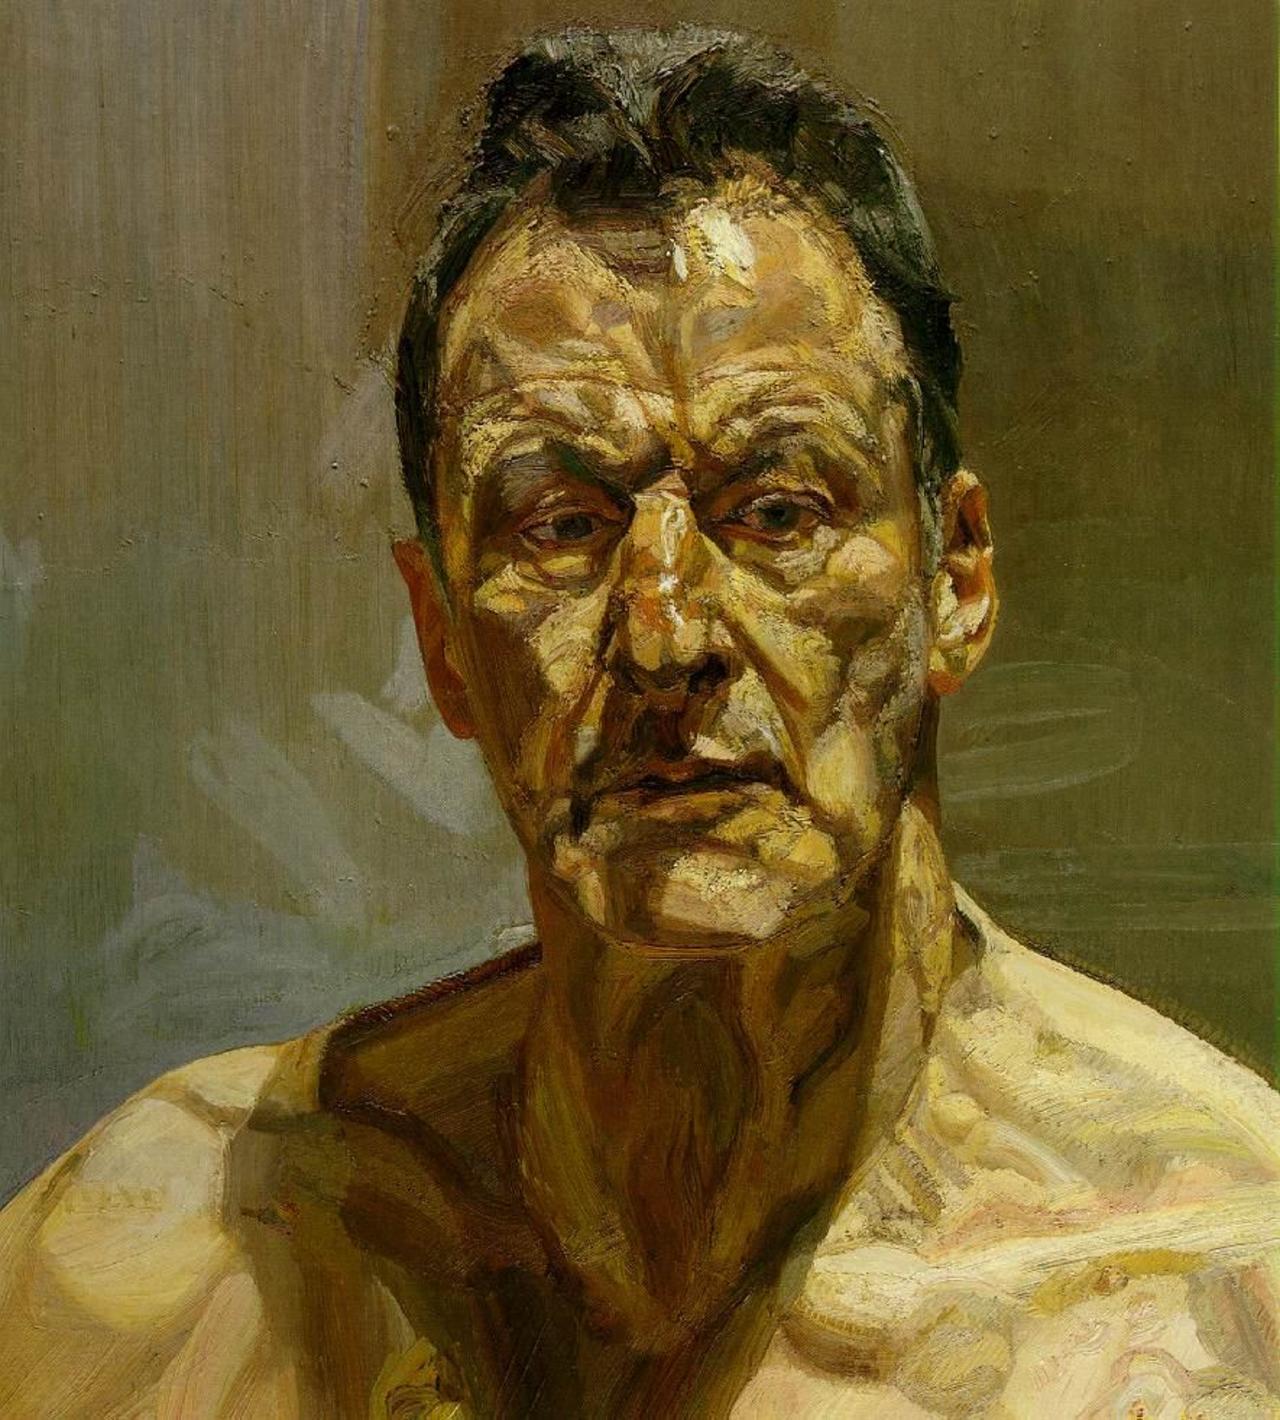 RT @ProjectSpartly: Reflection (Self-Portrait) - Lucian Freud. 1985  #art #painting http://t.co/3aAJx2NNr9